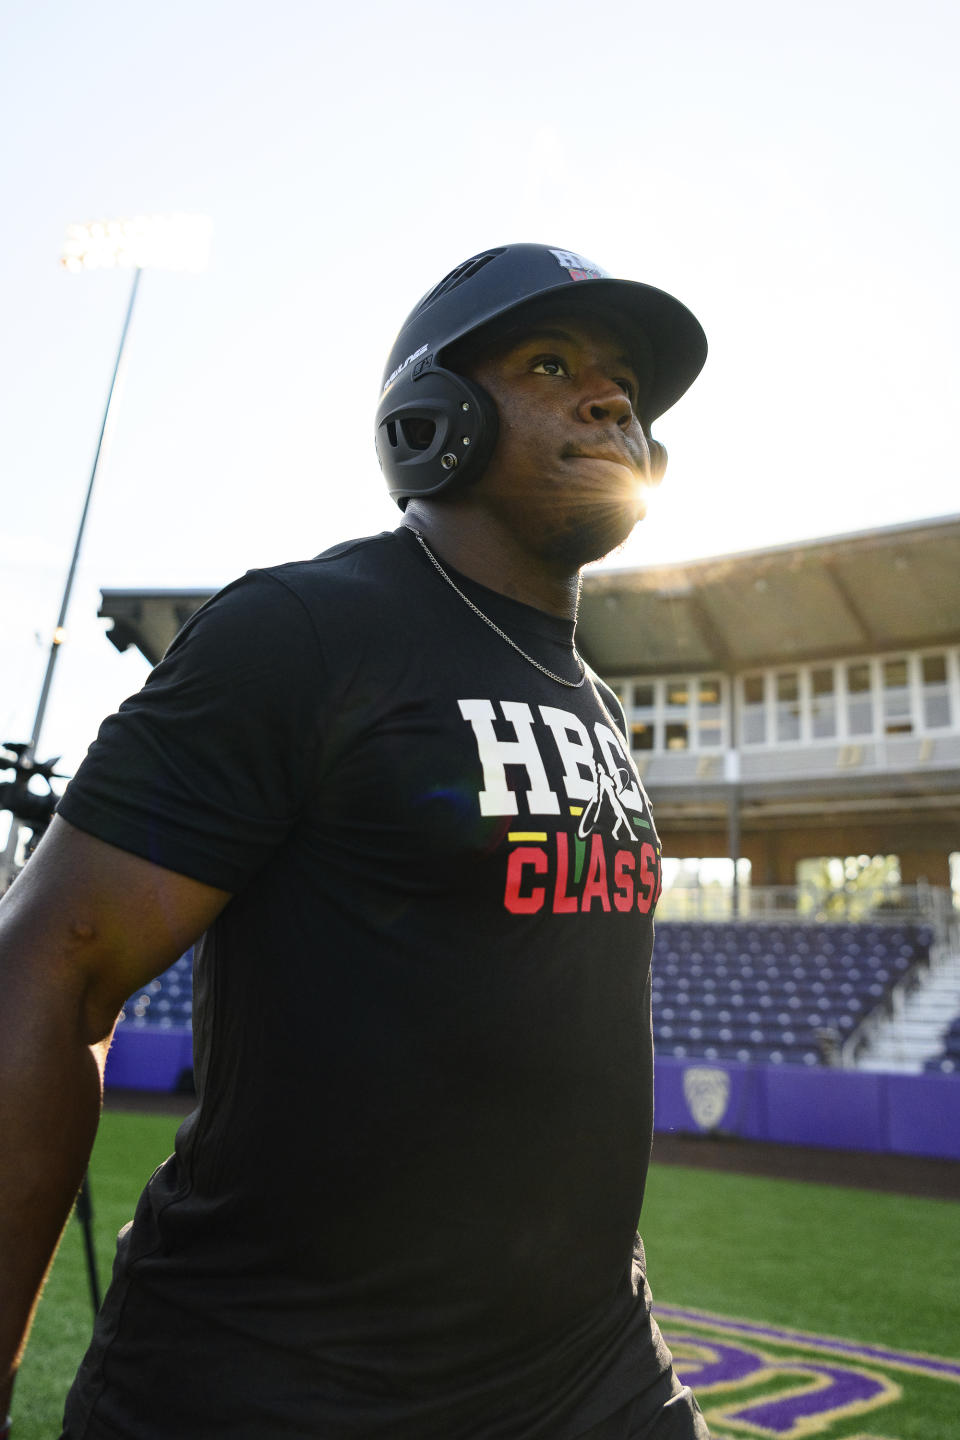 Grambling State University's Keylon Mack walks to the plate during a workout the day before the HBCU Swingman Classic during the 2023 All Star Week, Thursday, July 6, 2023, in Seattle. (AP Photo/Caean Couto)